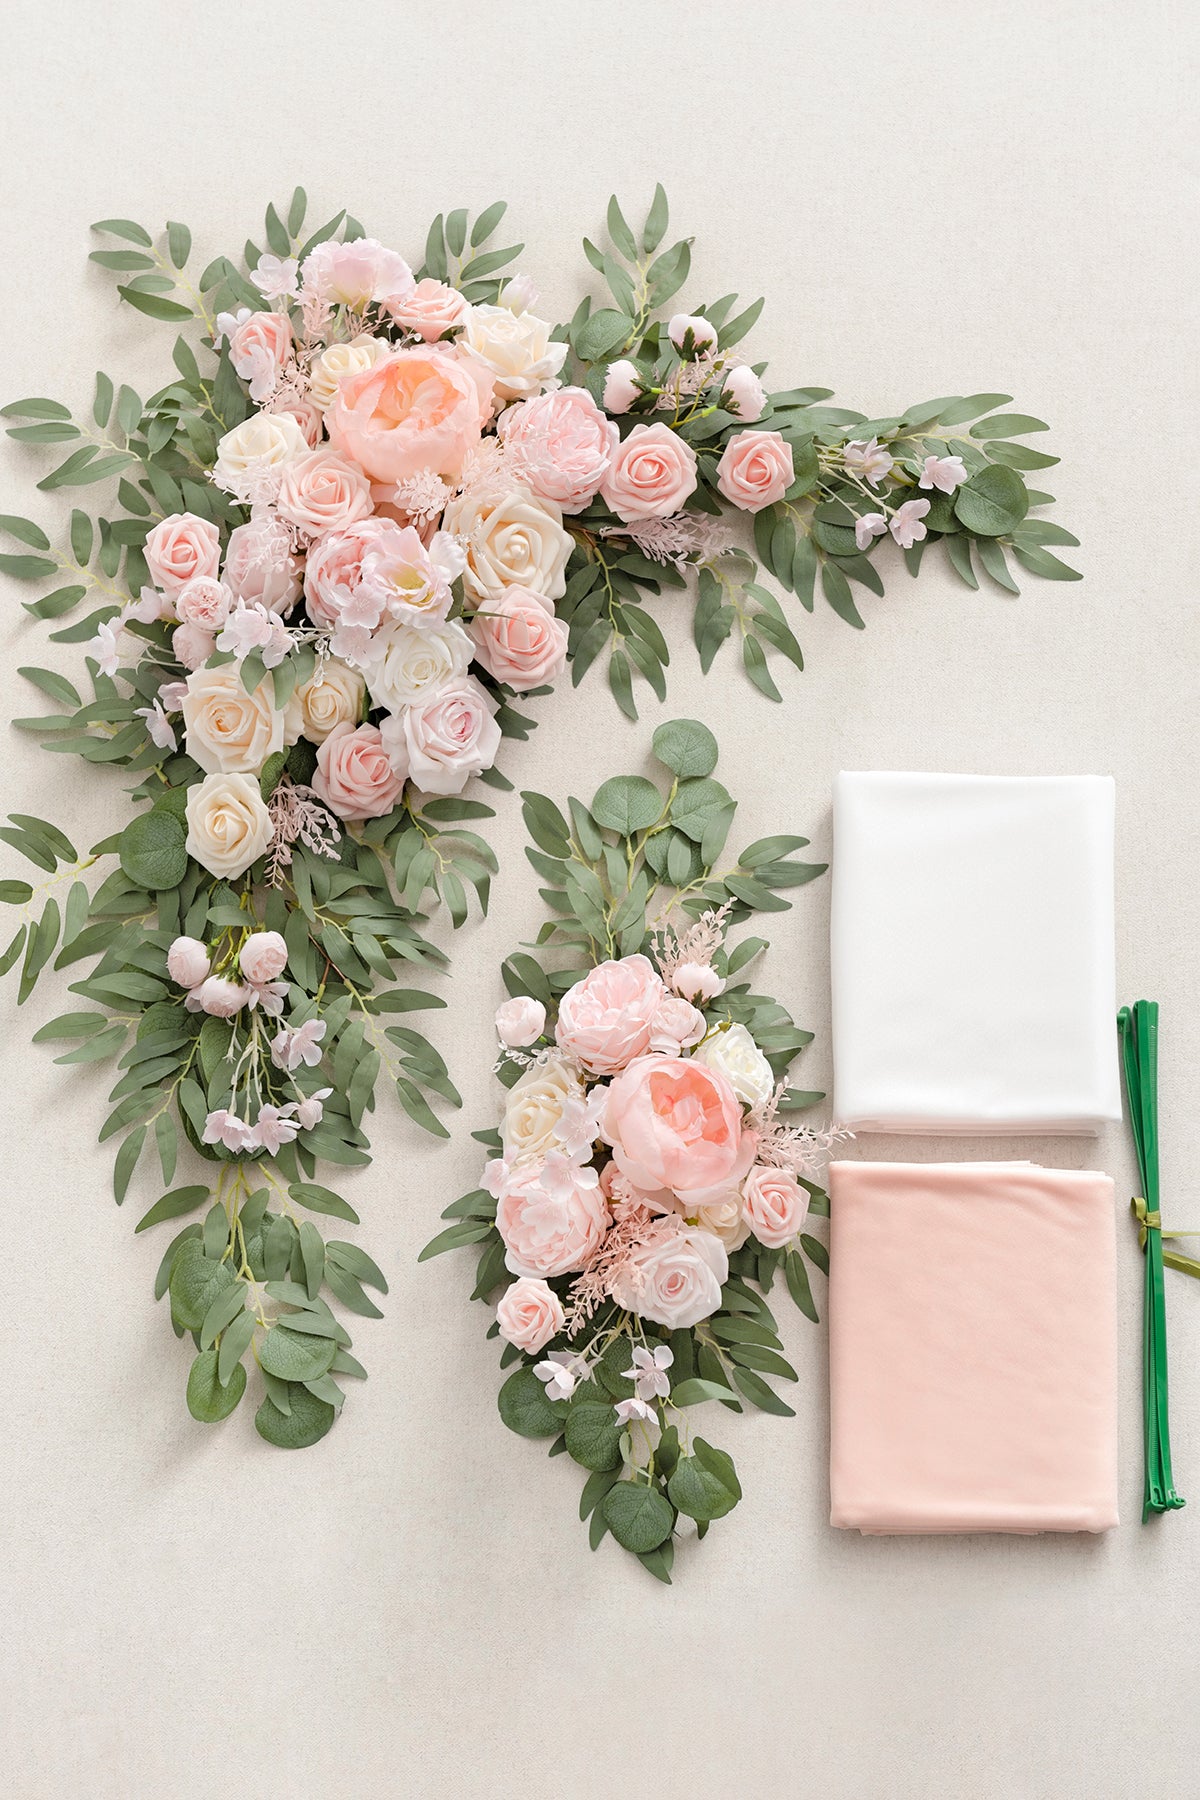 Flower Arch Decor with Drapes in Blush & Cream| Clearance